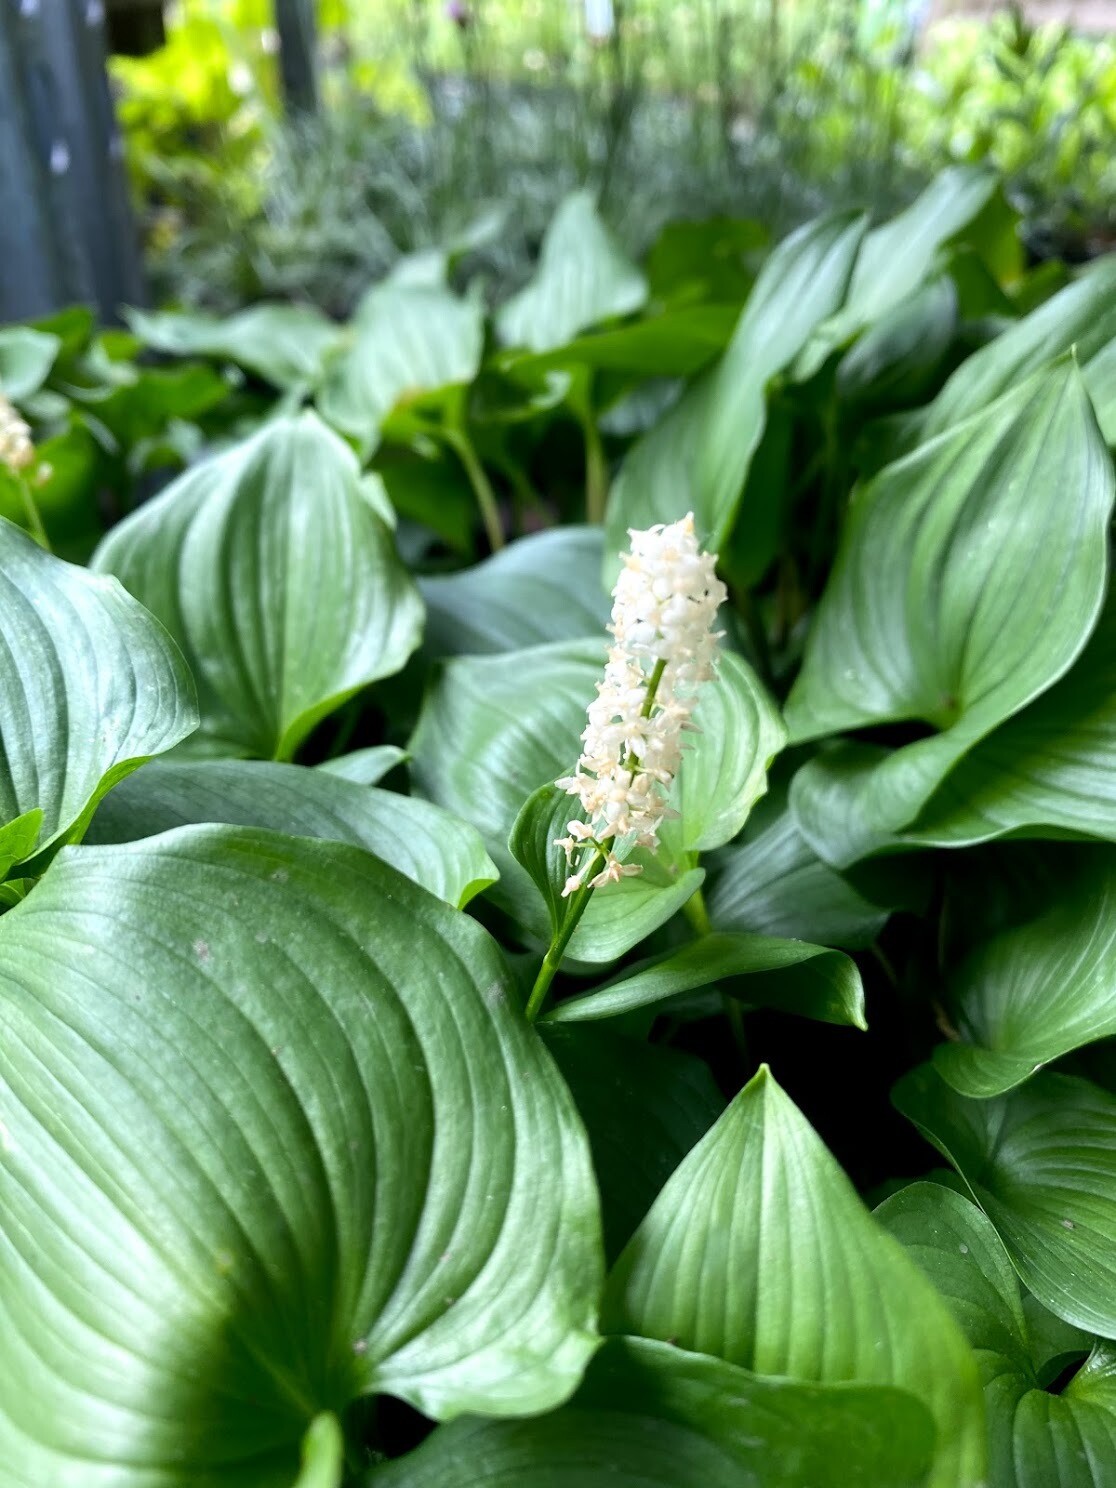 Maianthemum dilatatum - False Lily of the Valley, Container Size: 4 Inch